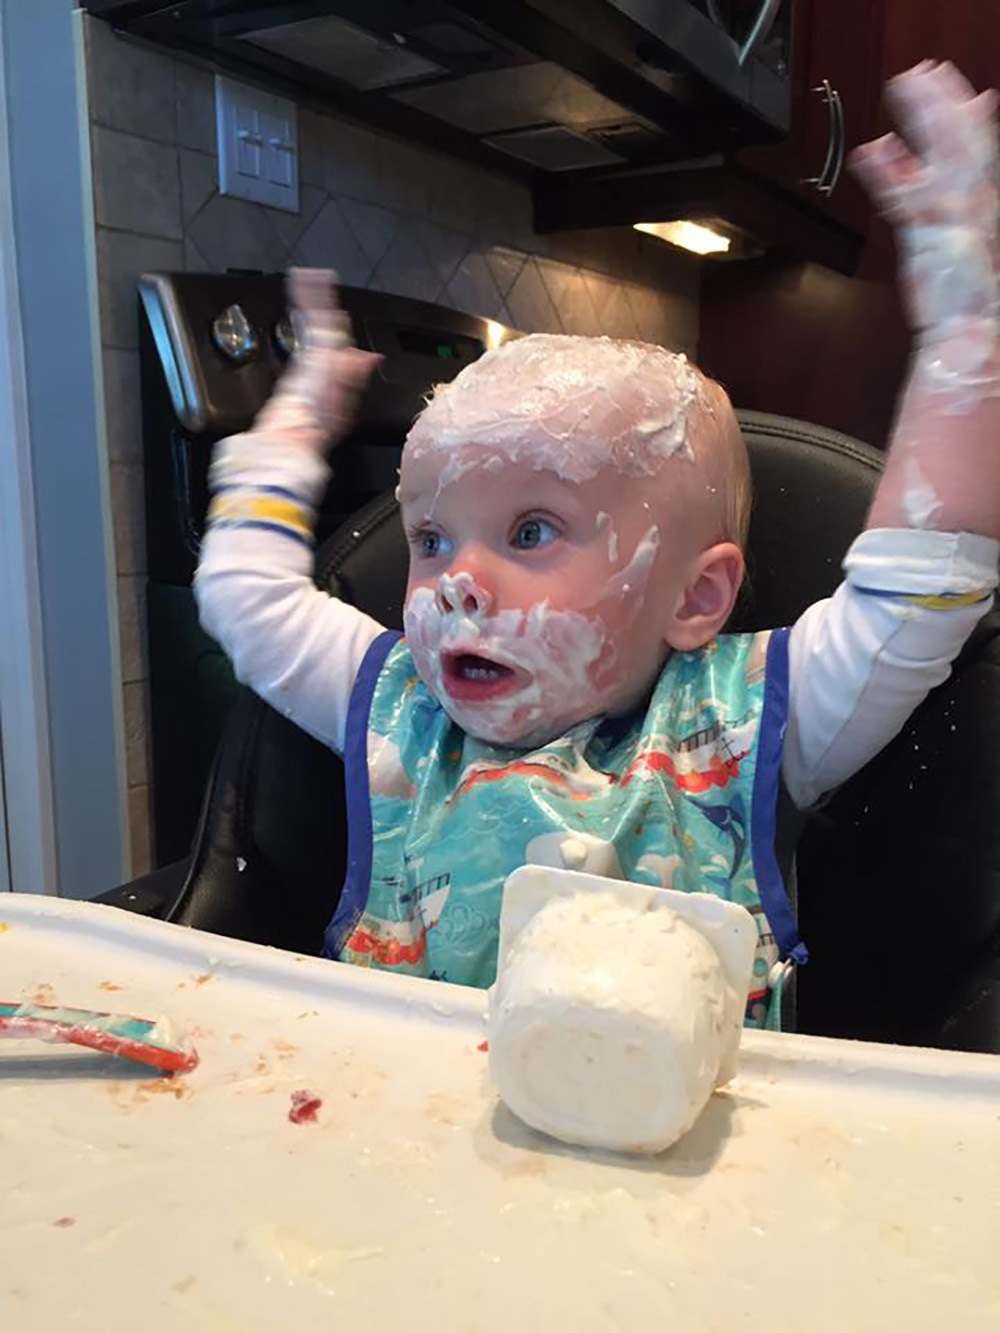 26 Kids Who Would Kick Ass in a Food Fight